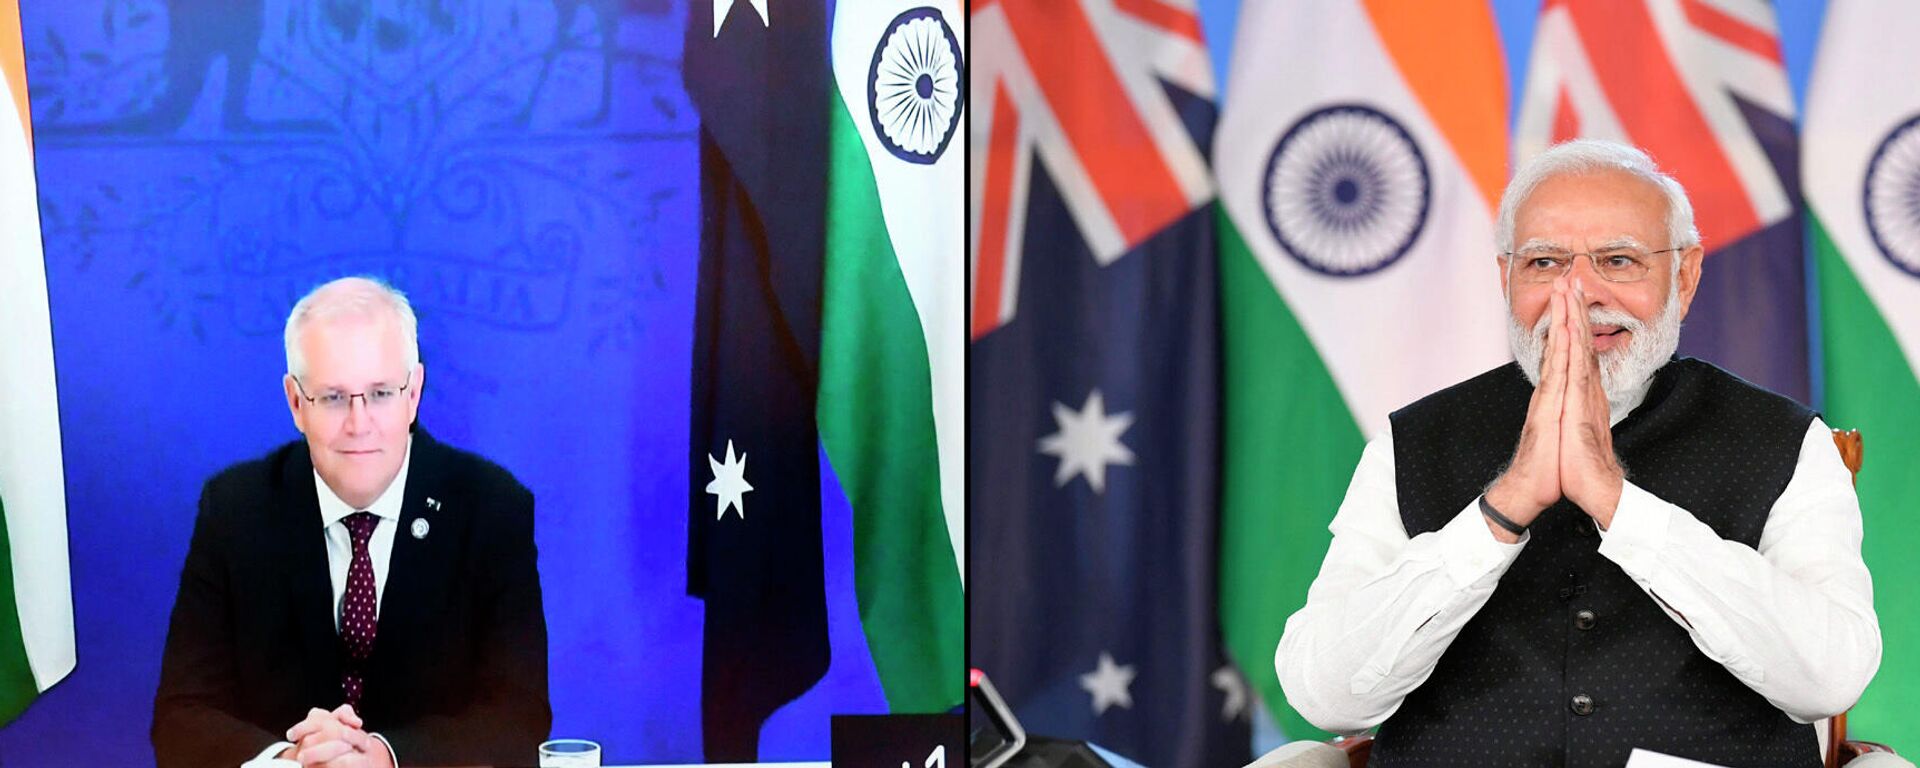 A photograph released by India's Press Information Bureau shows Indian Prime Minister Narendra Modi during a virtual summit with Australian Prime Minister Scott Morrison (unseen) on 21 March 2022 - Sputnik International, 1920, 30.09.2022